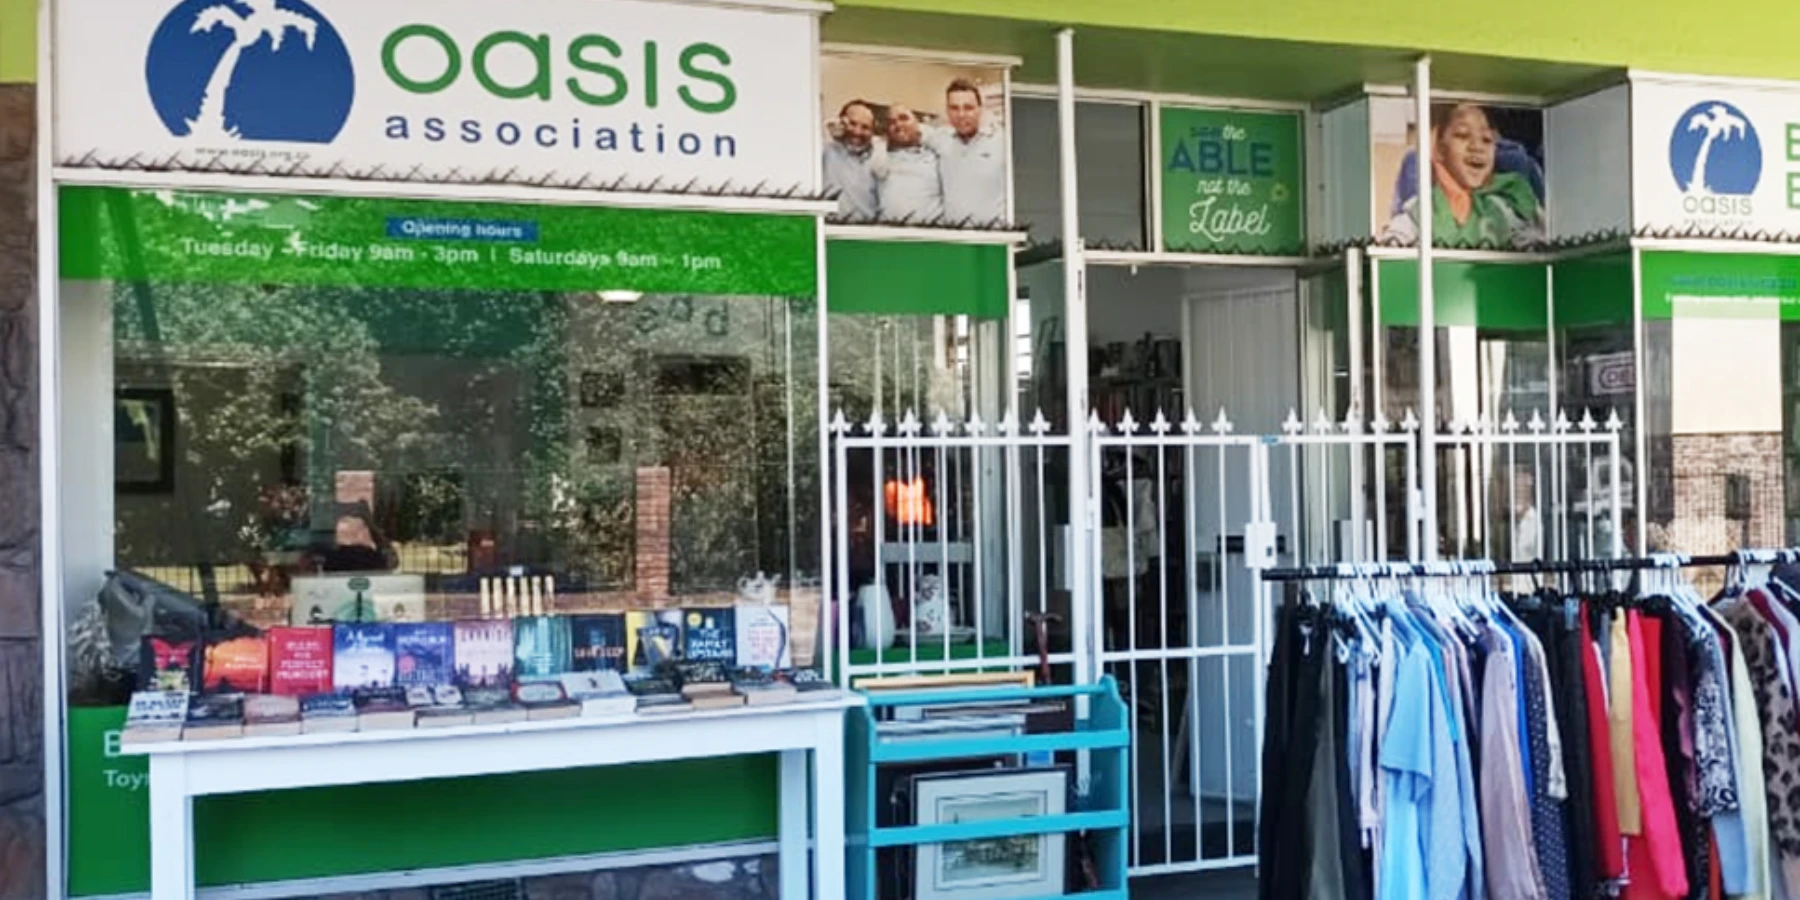 Oasis donating furniture in Cape Town